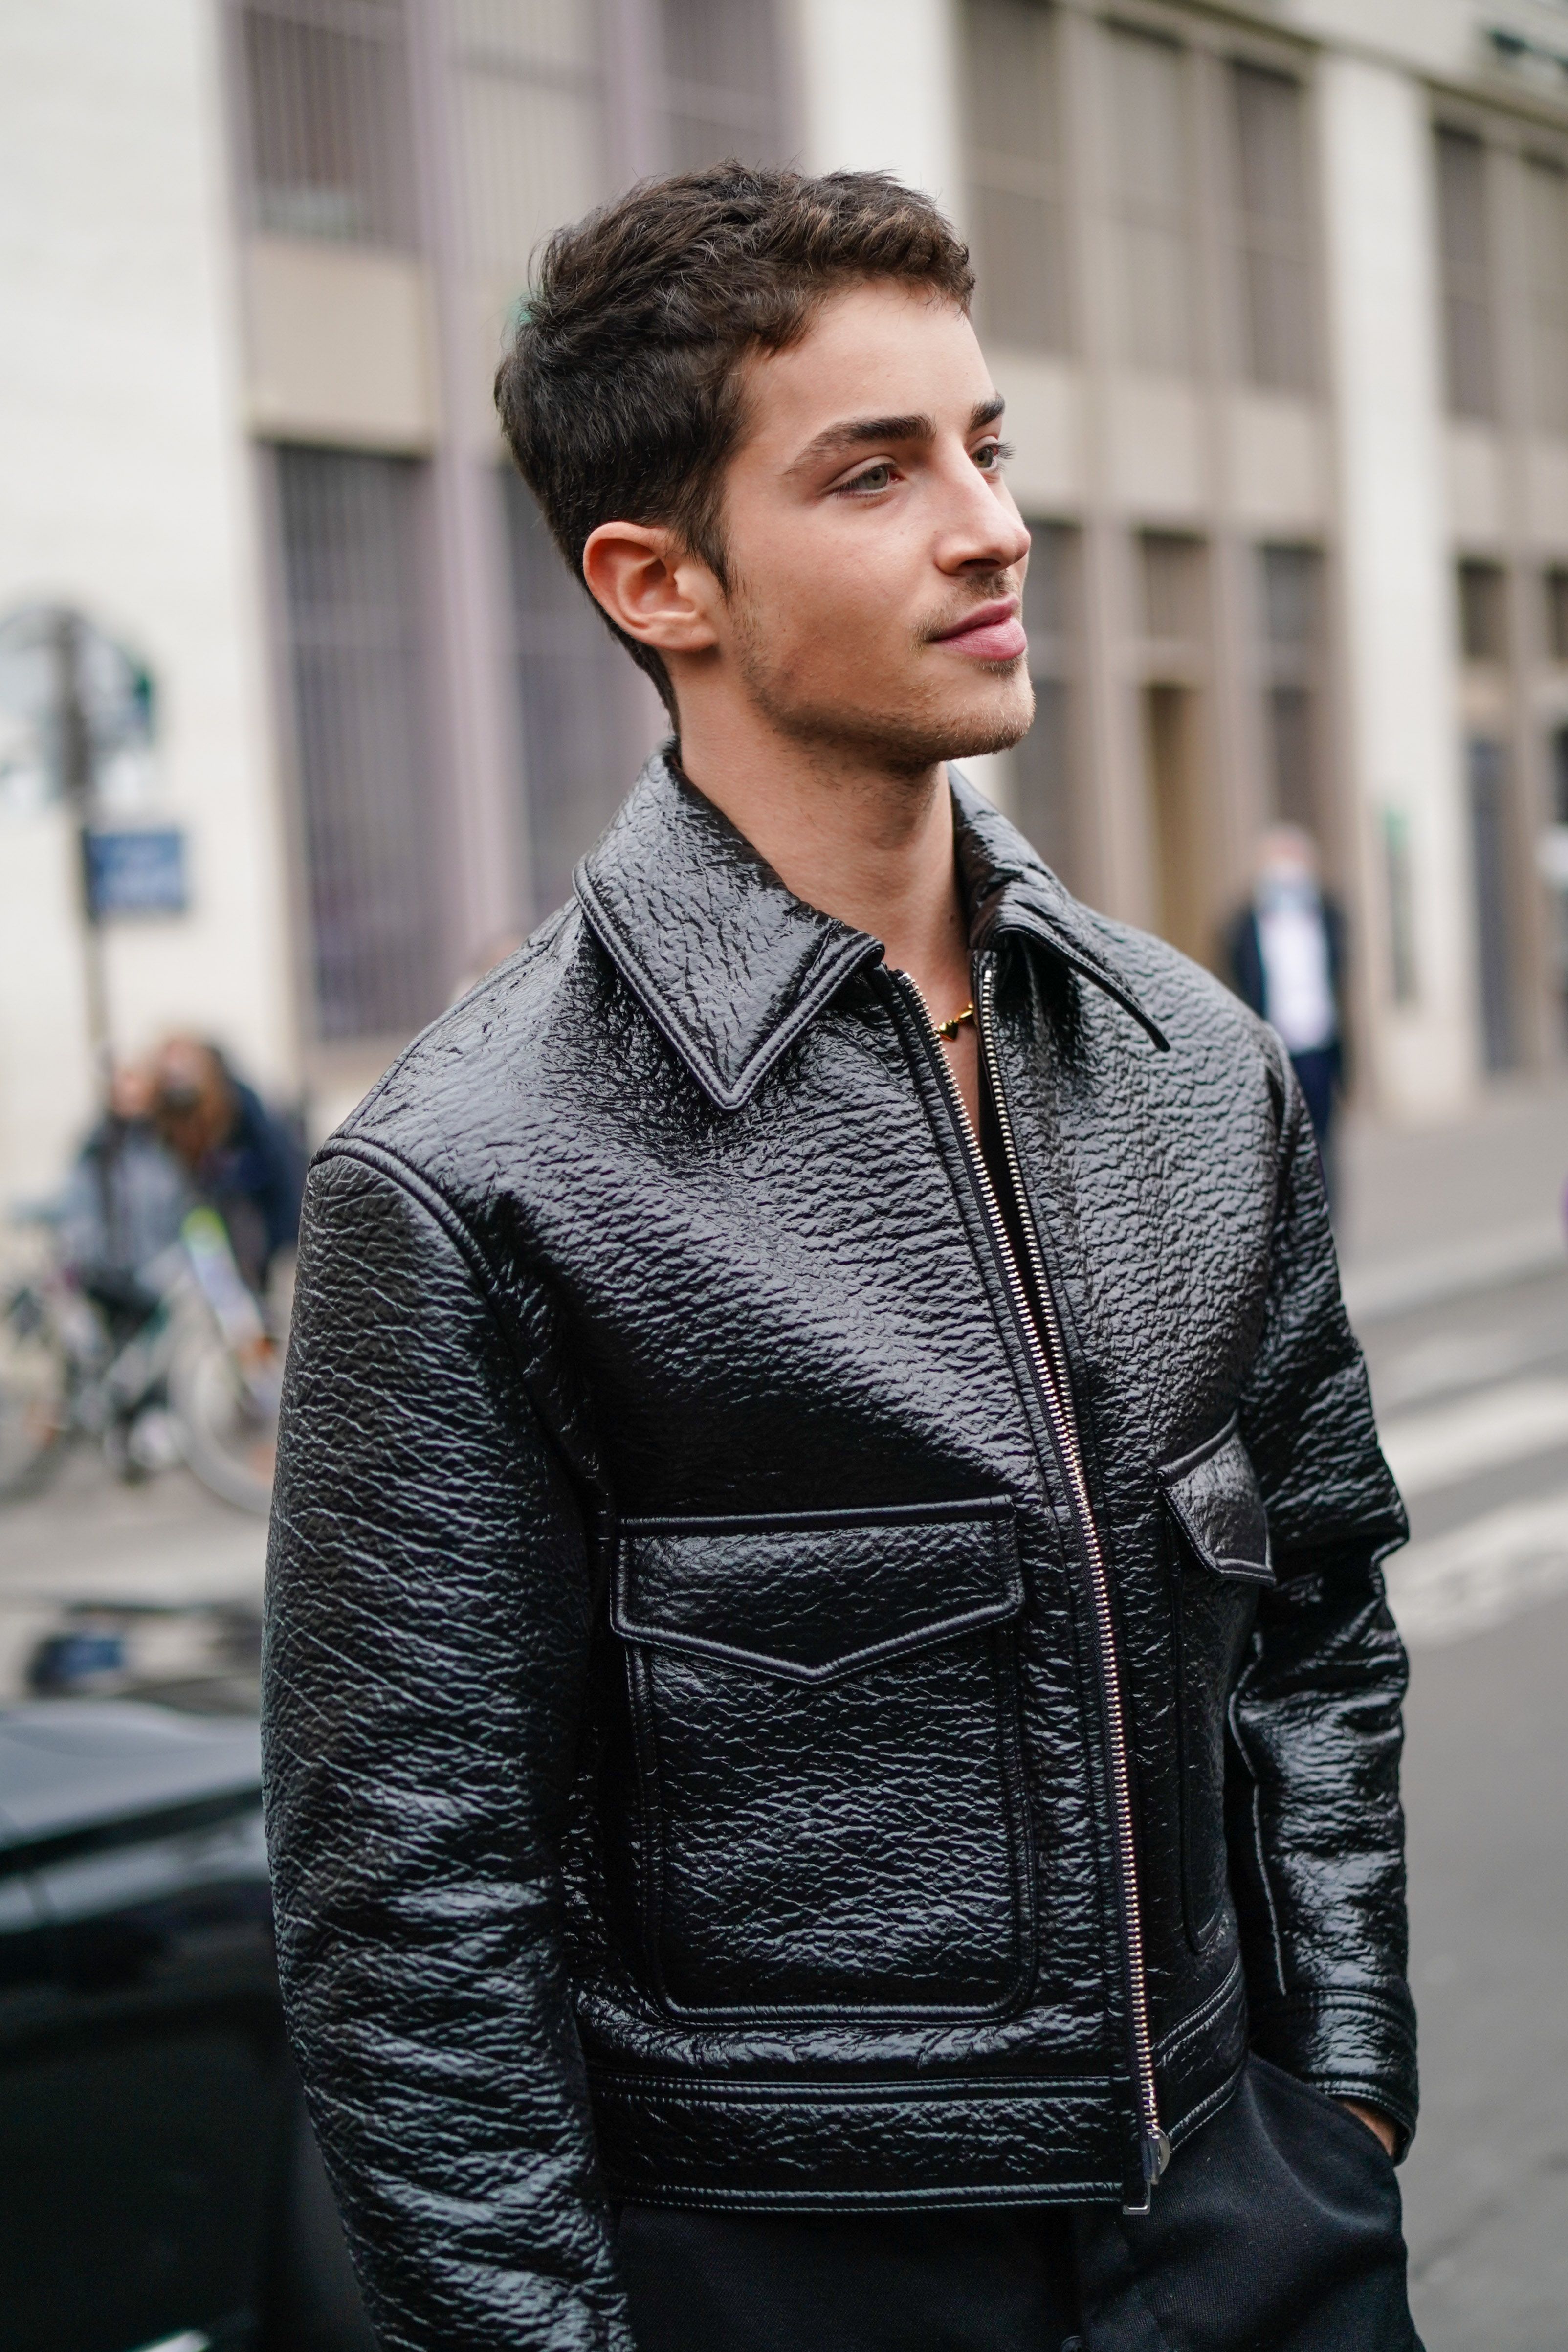 Amazing Mens Genuine Leather Jackets To Try Right Now - NYC Leather Jackets